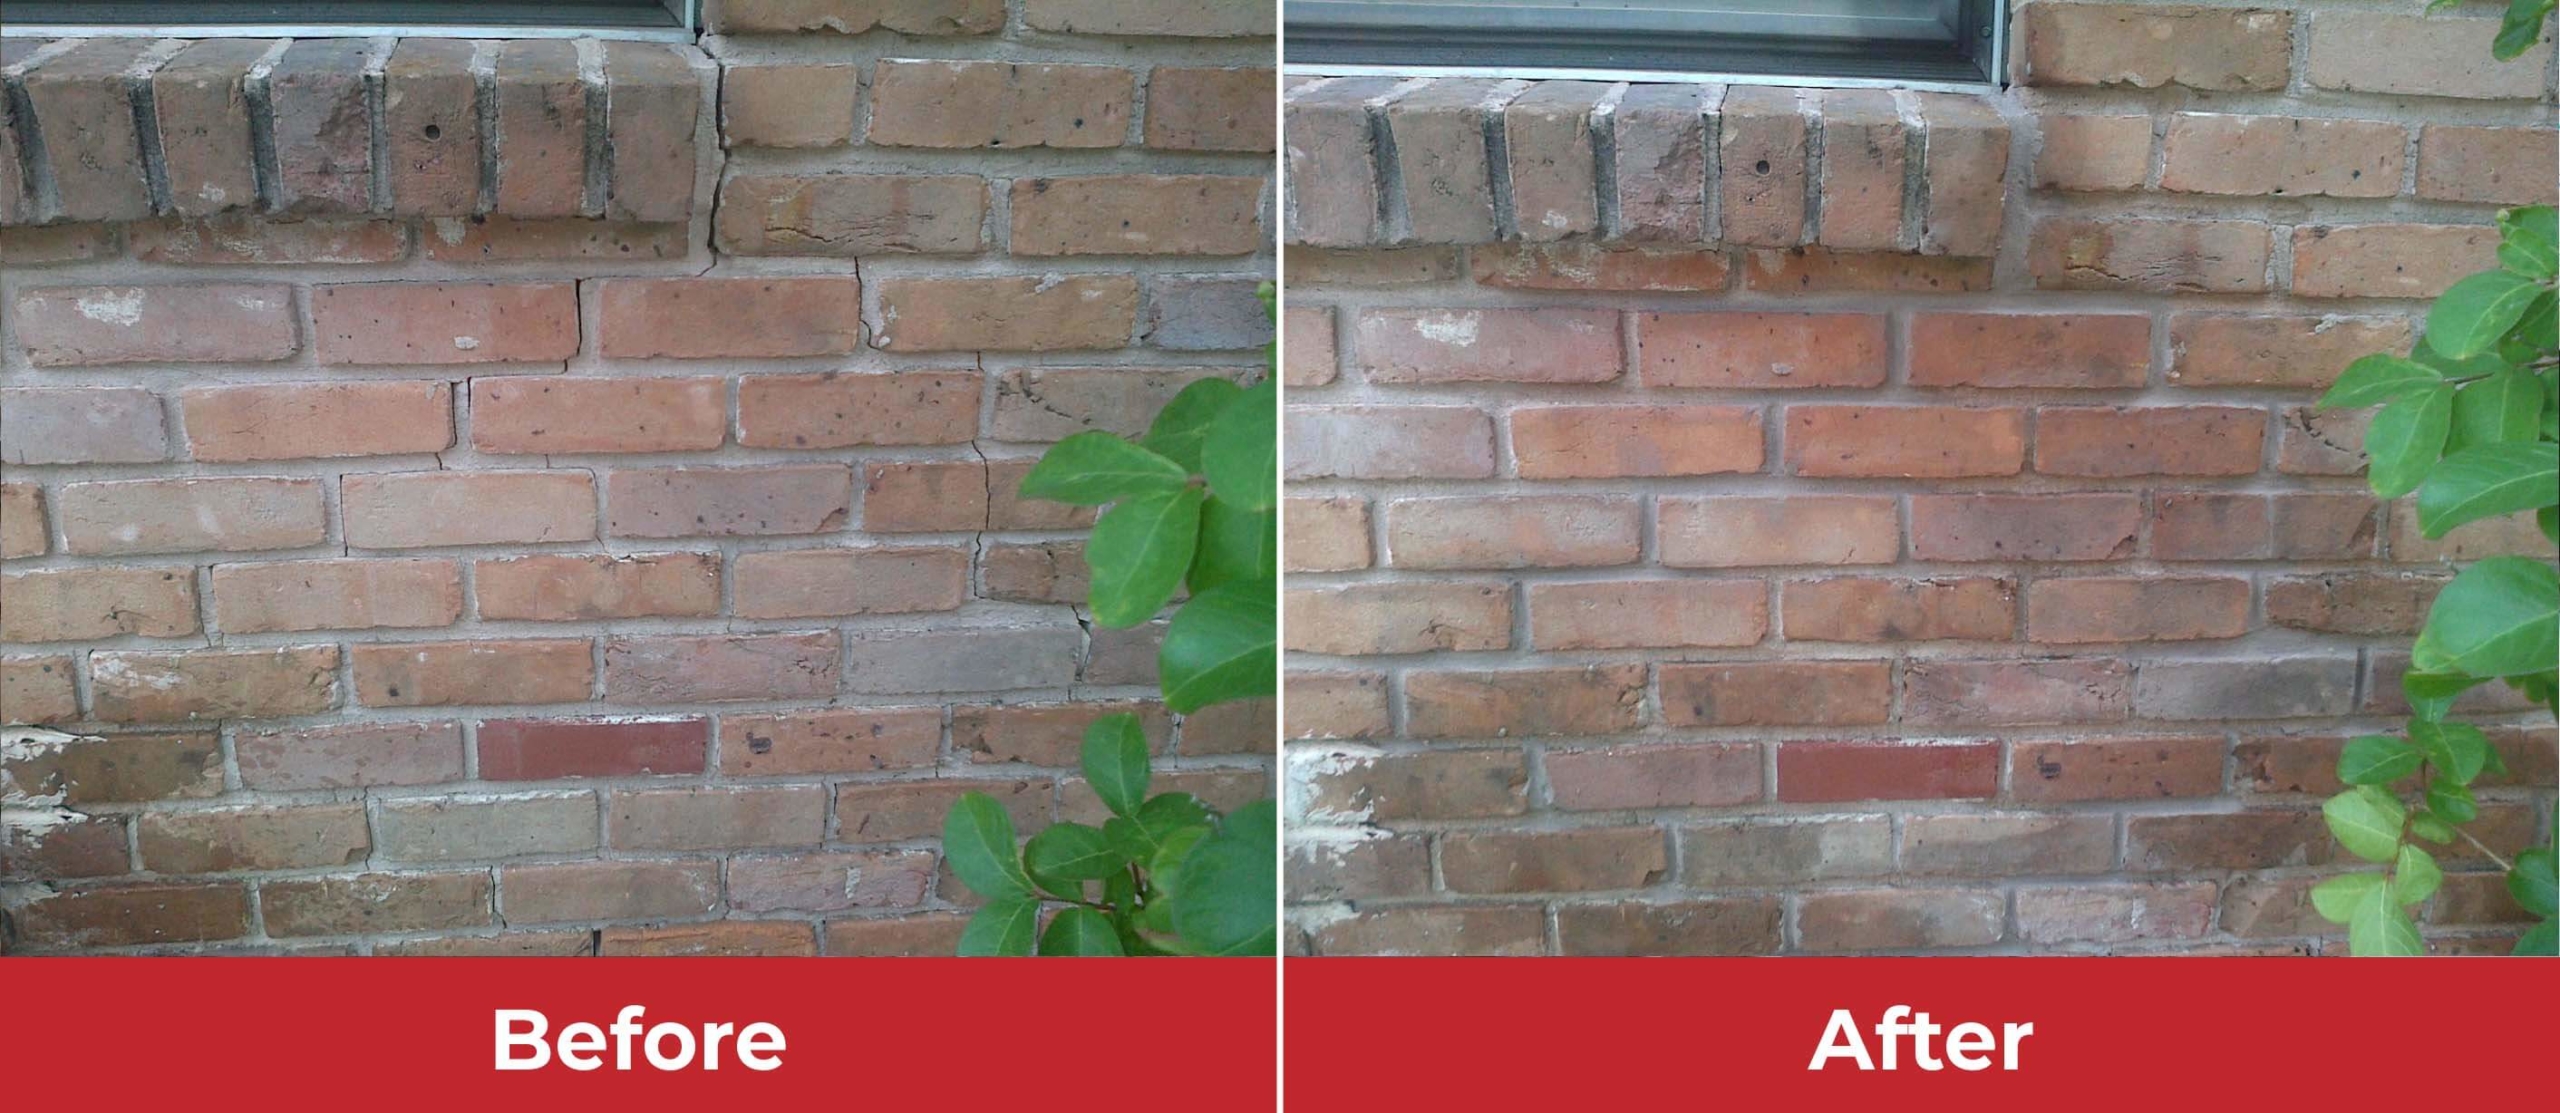 brick wall crack before and after